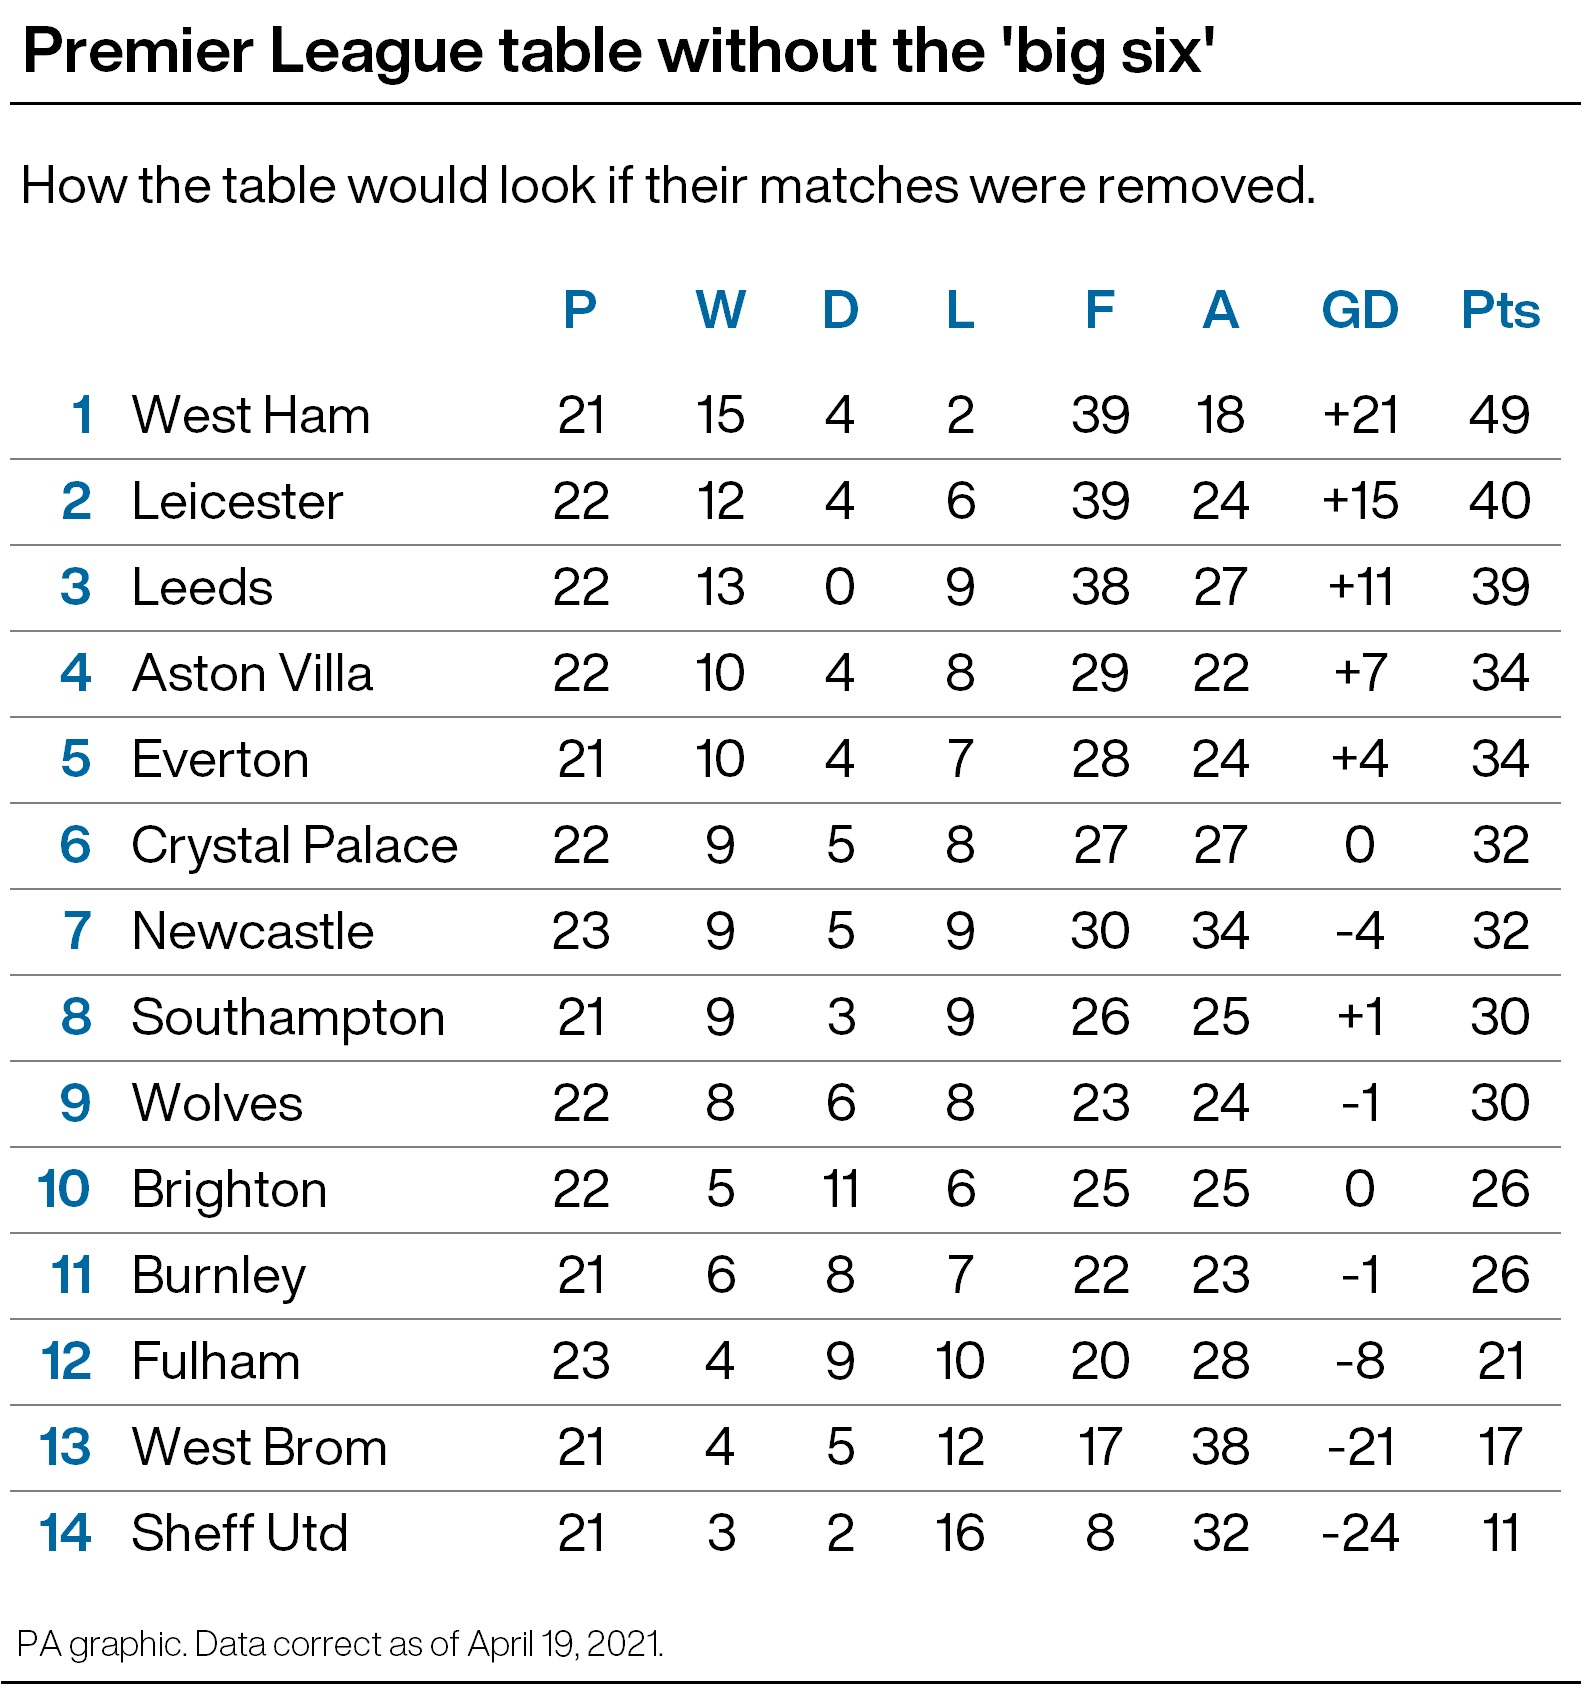 Premier League table without the results of Super League clubs